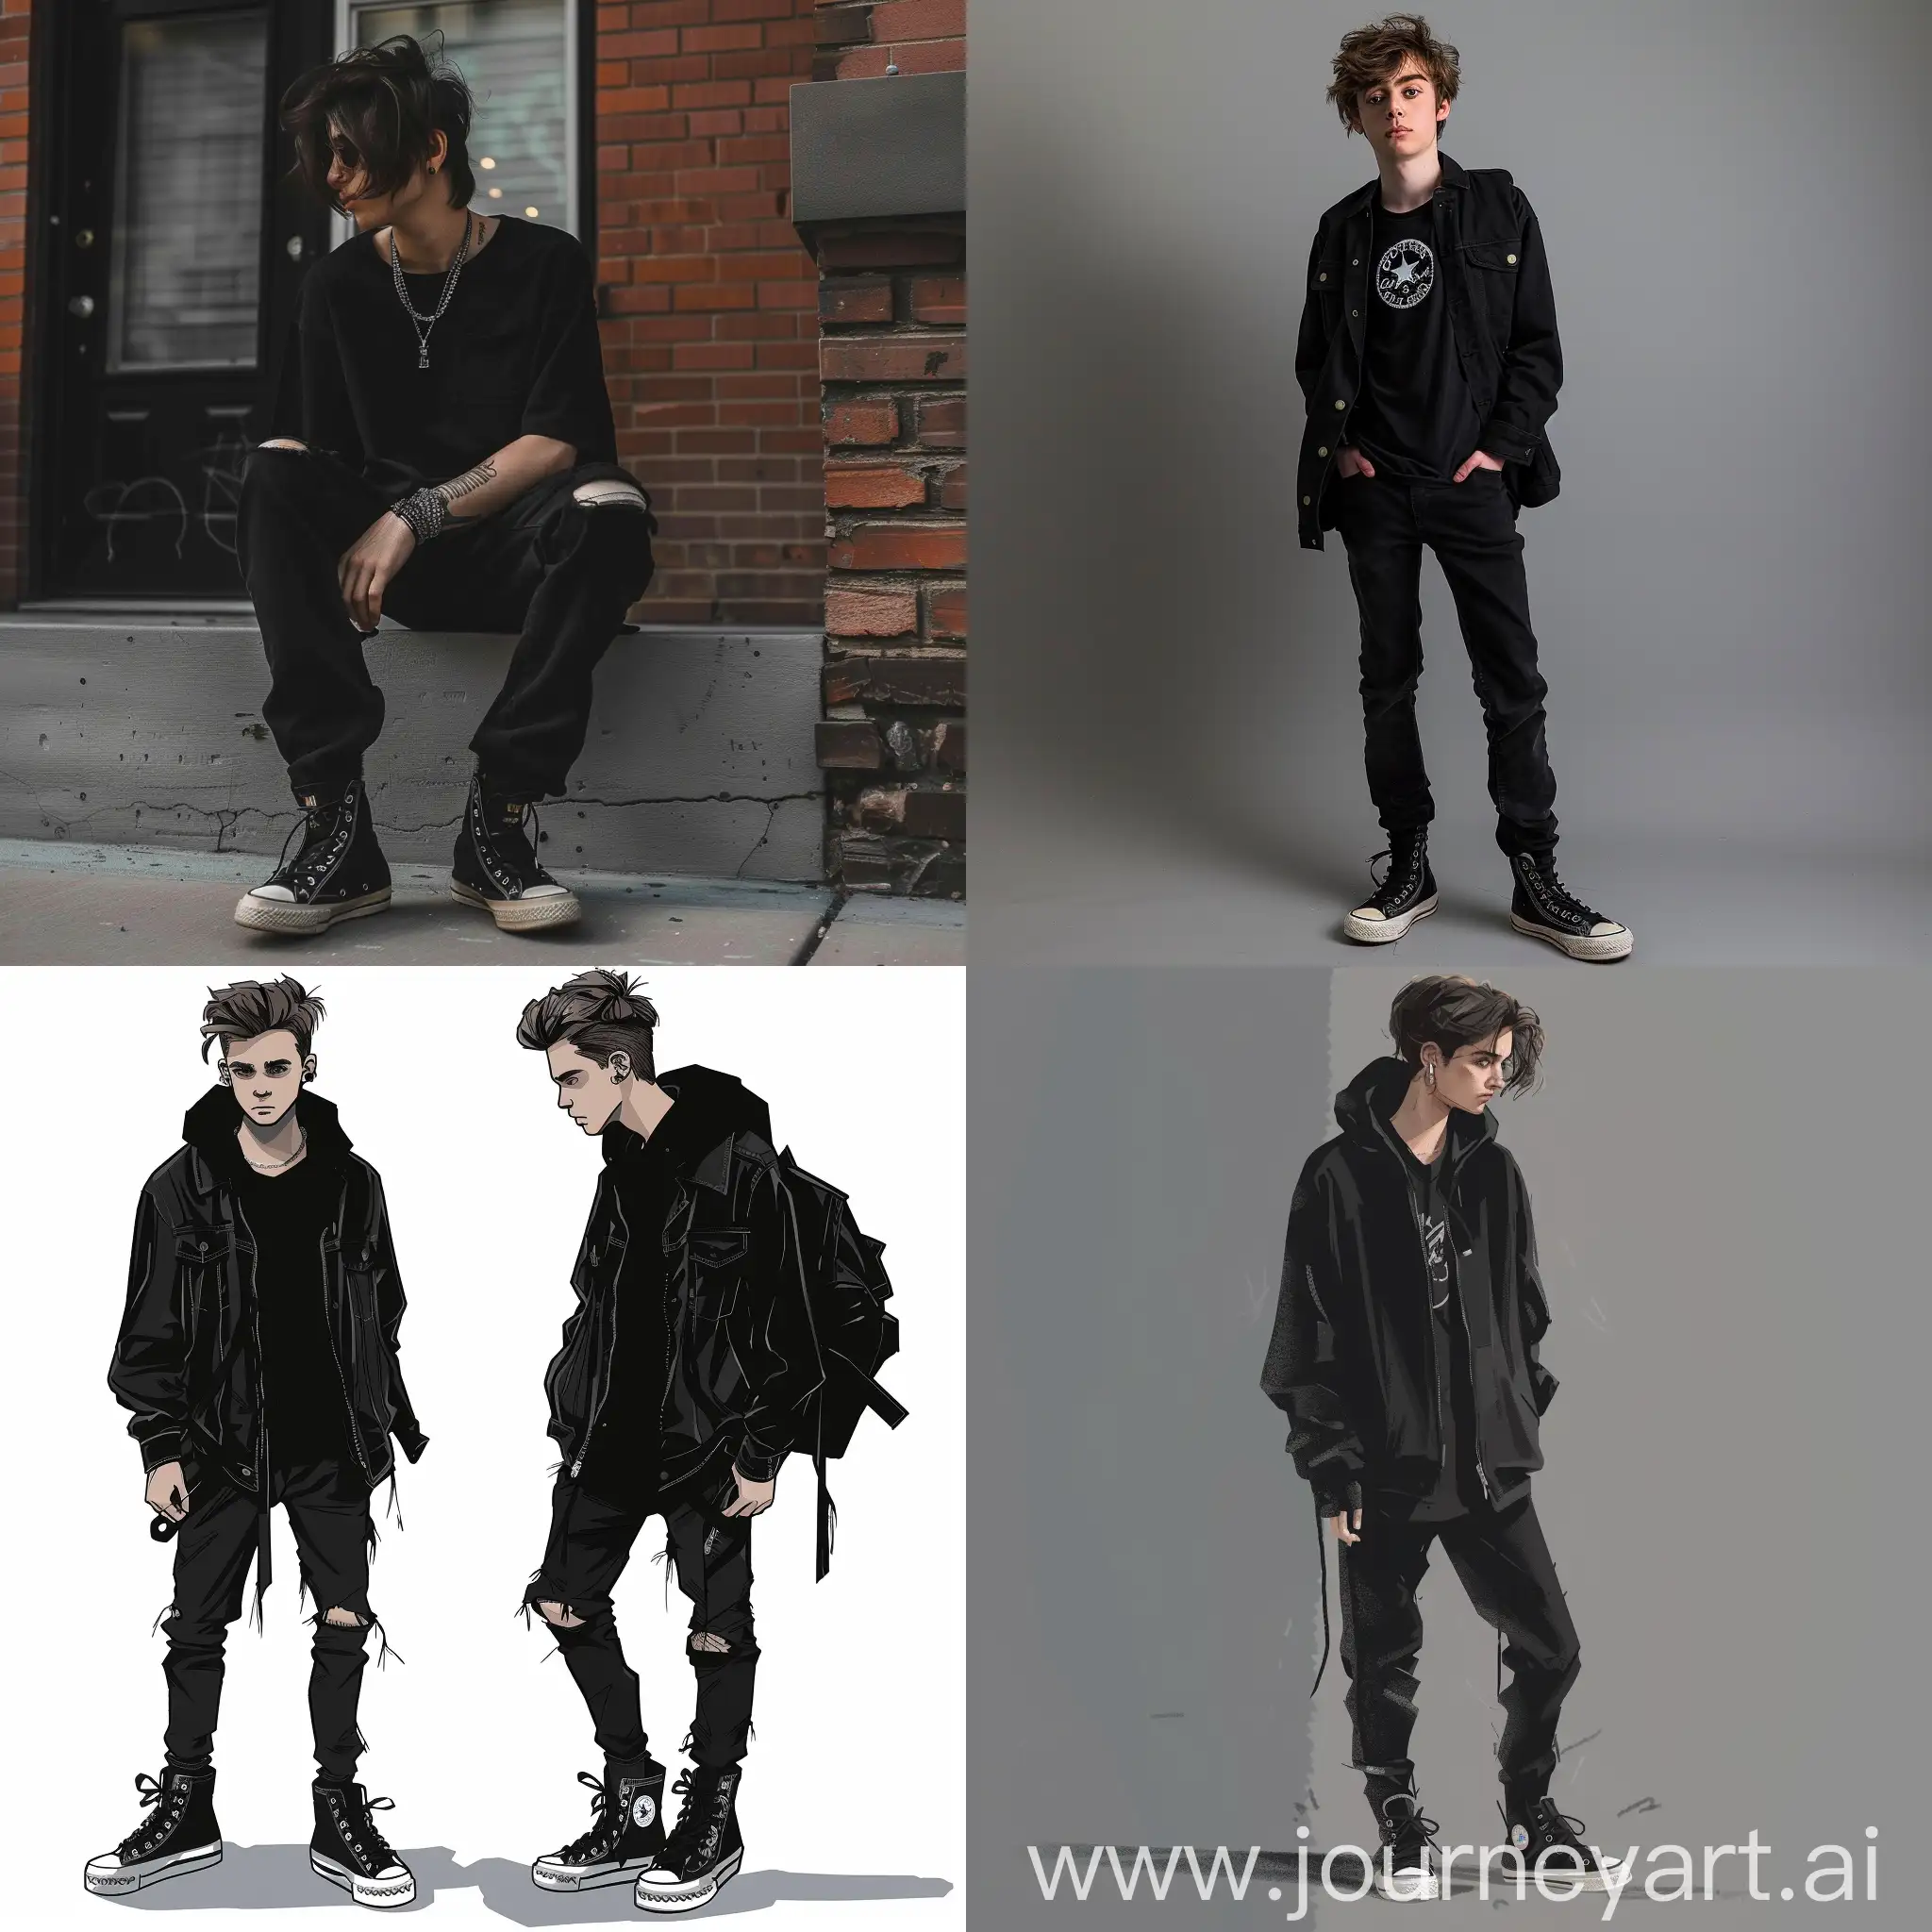 Teen-in-Tim-Burton-Style-Wearing-All-Black-and-Converse-Sneakers